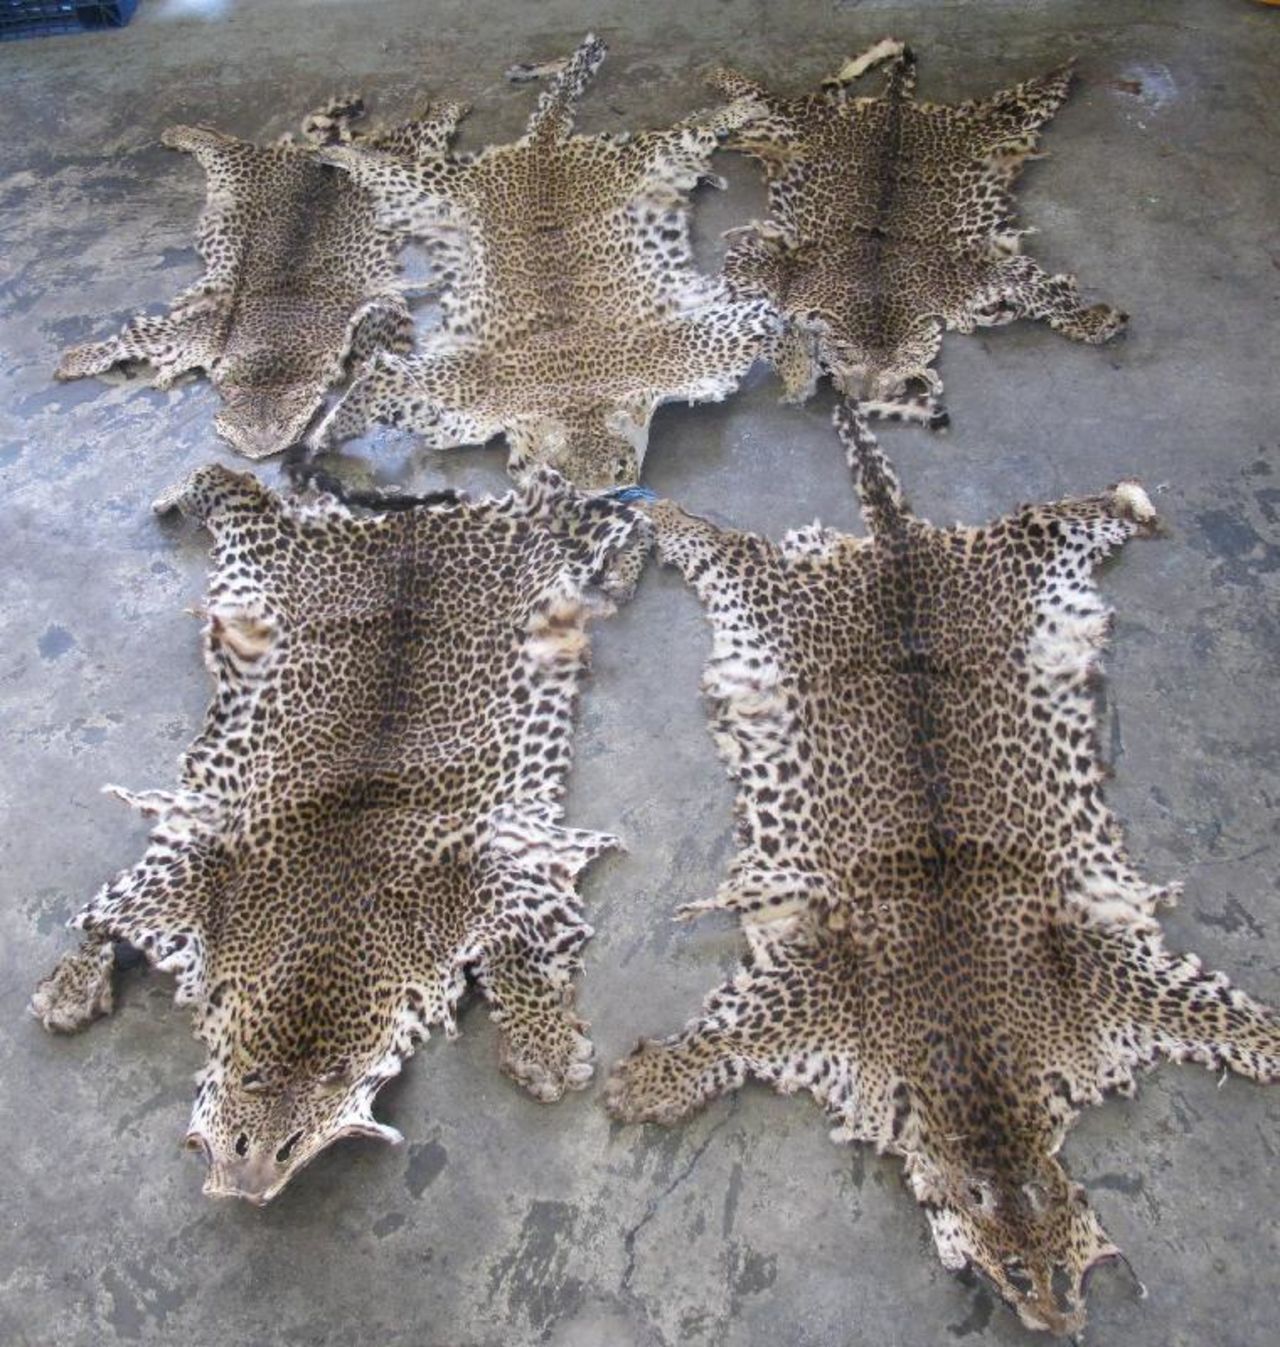 In Hong Kong's August 6 animal goods seizure, customs officials seized five leopard pelts in addition to more than 1,000 ivory tusks and rhino horns.  